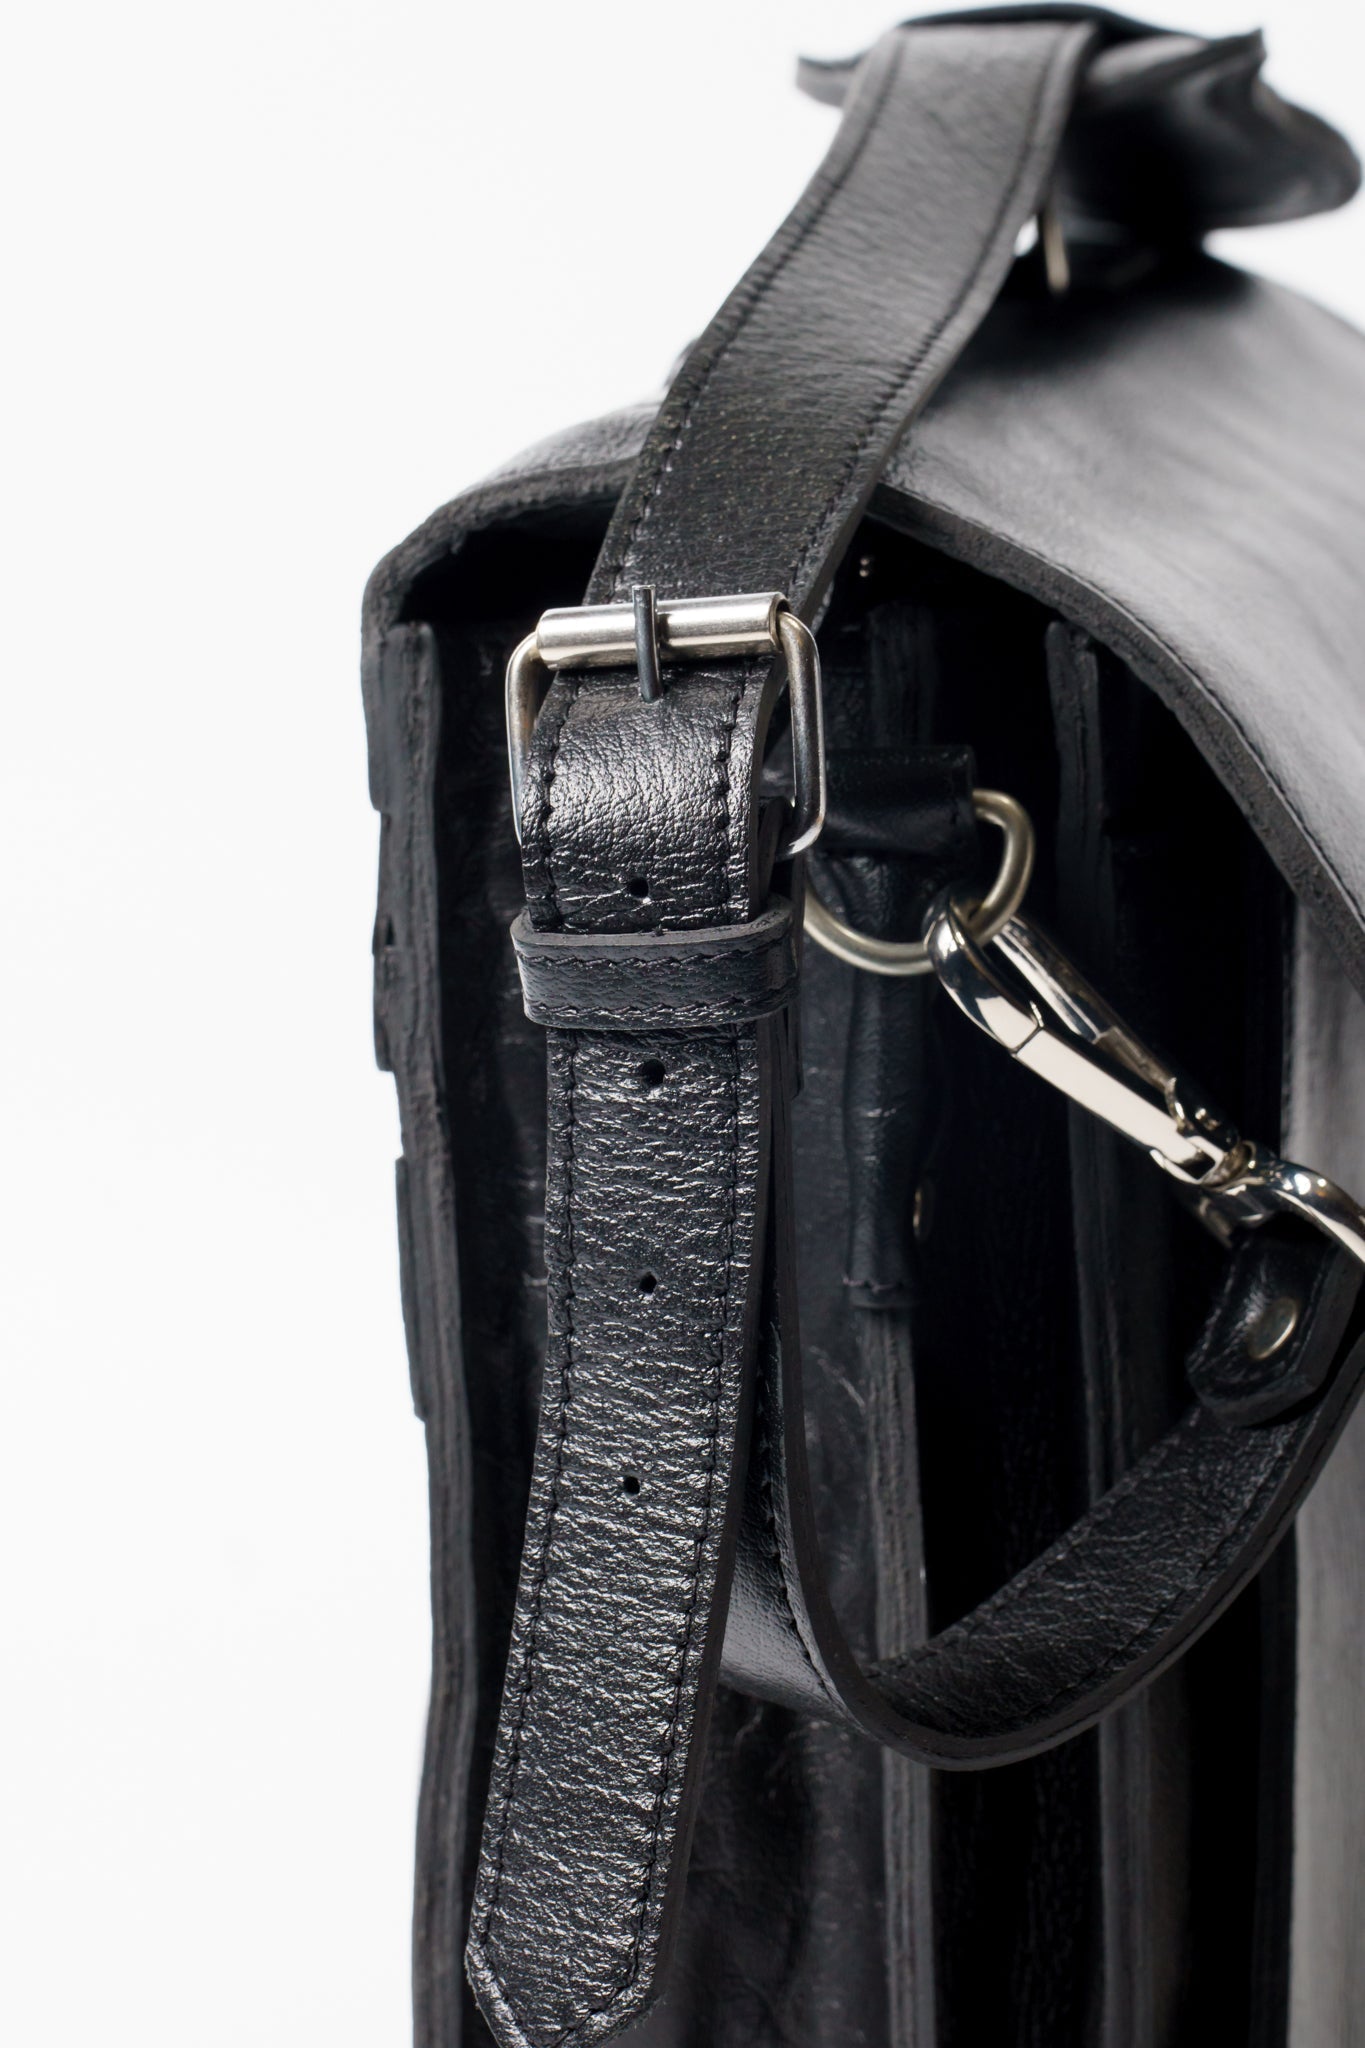 Side view close-up of Chamra's Black leather bag.  The image showcases an adjustable and removable shoulder straps, with brass buckles for long-term use.